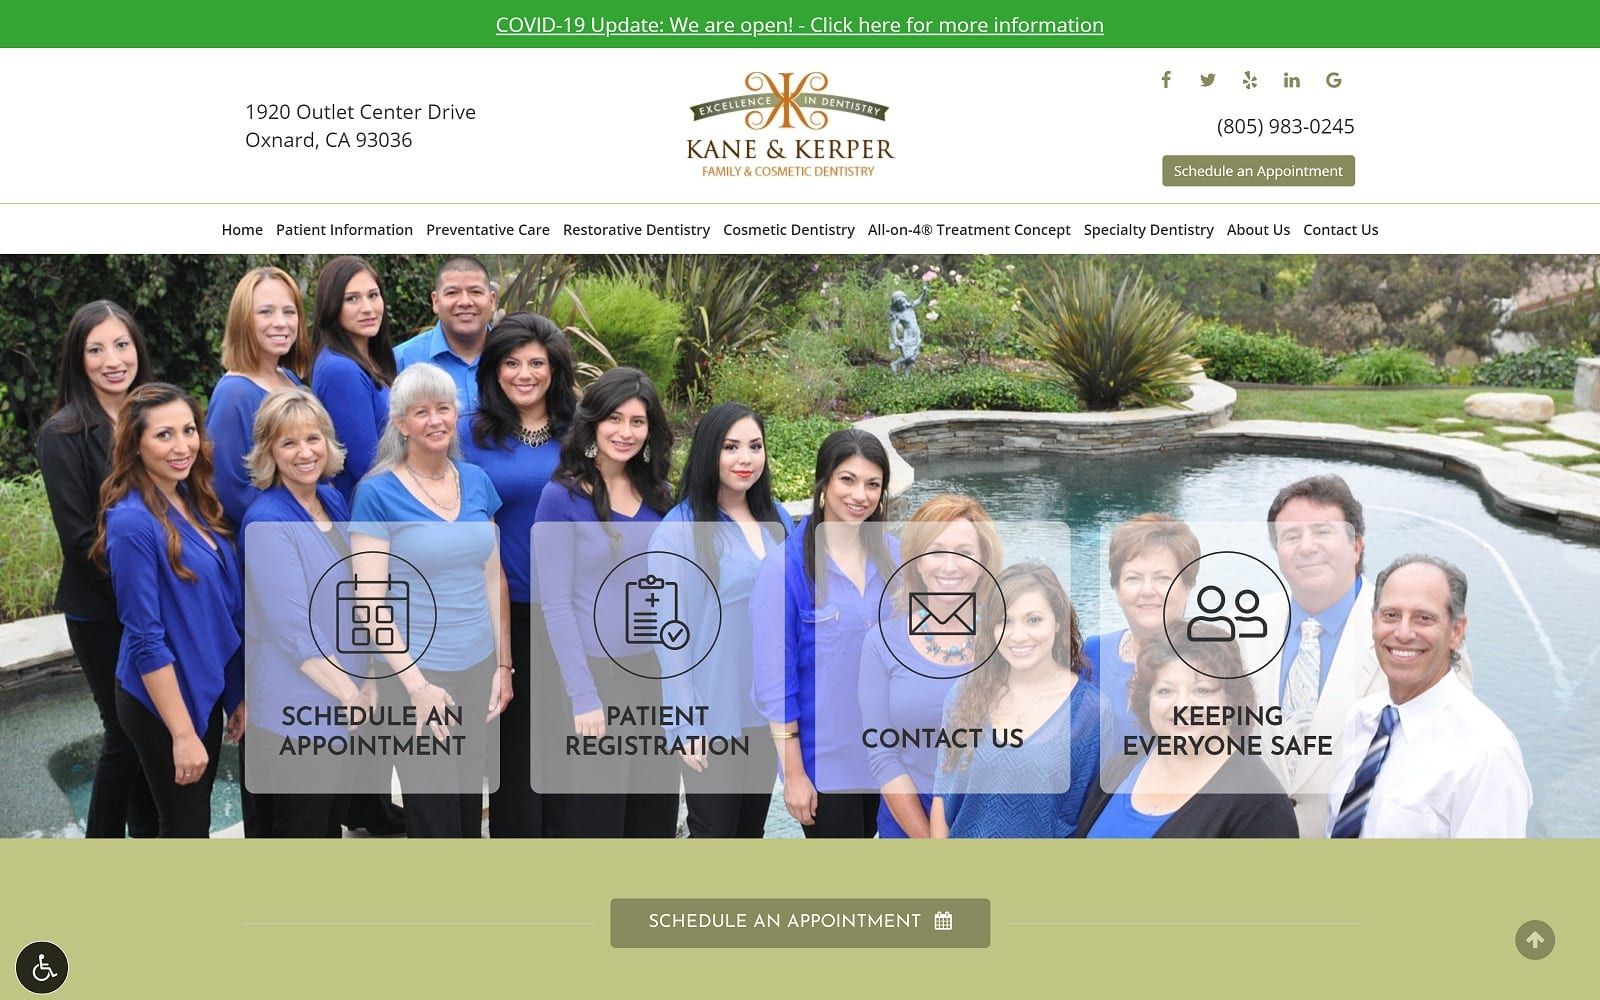 The screenshot of kane and kerper family and cosmetic dentistry dentist93036. Com website